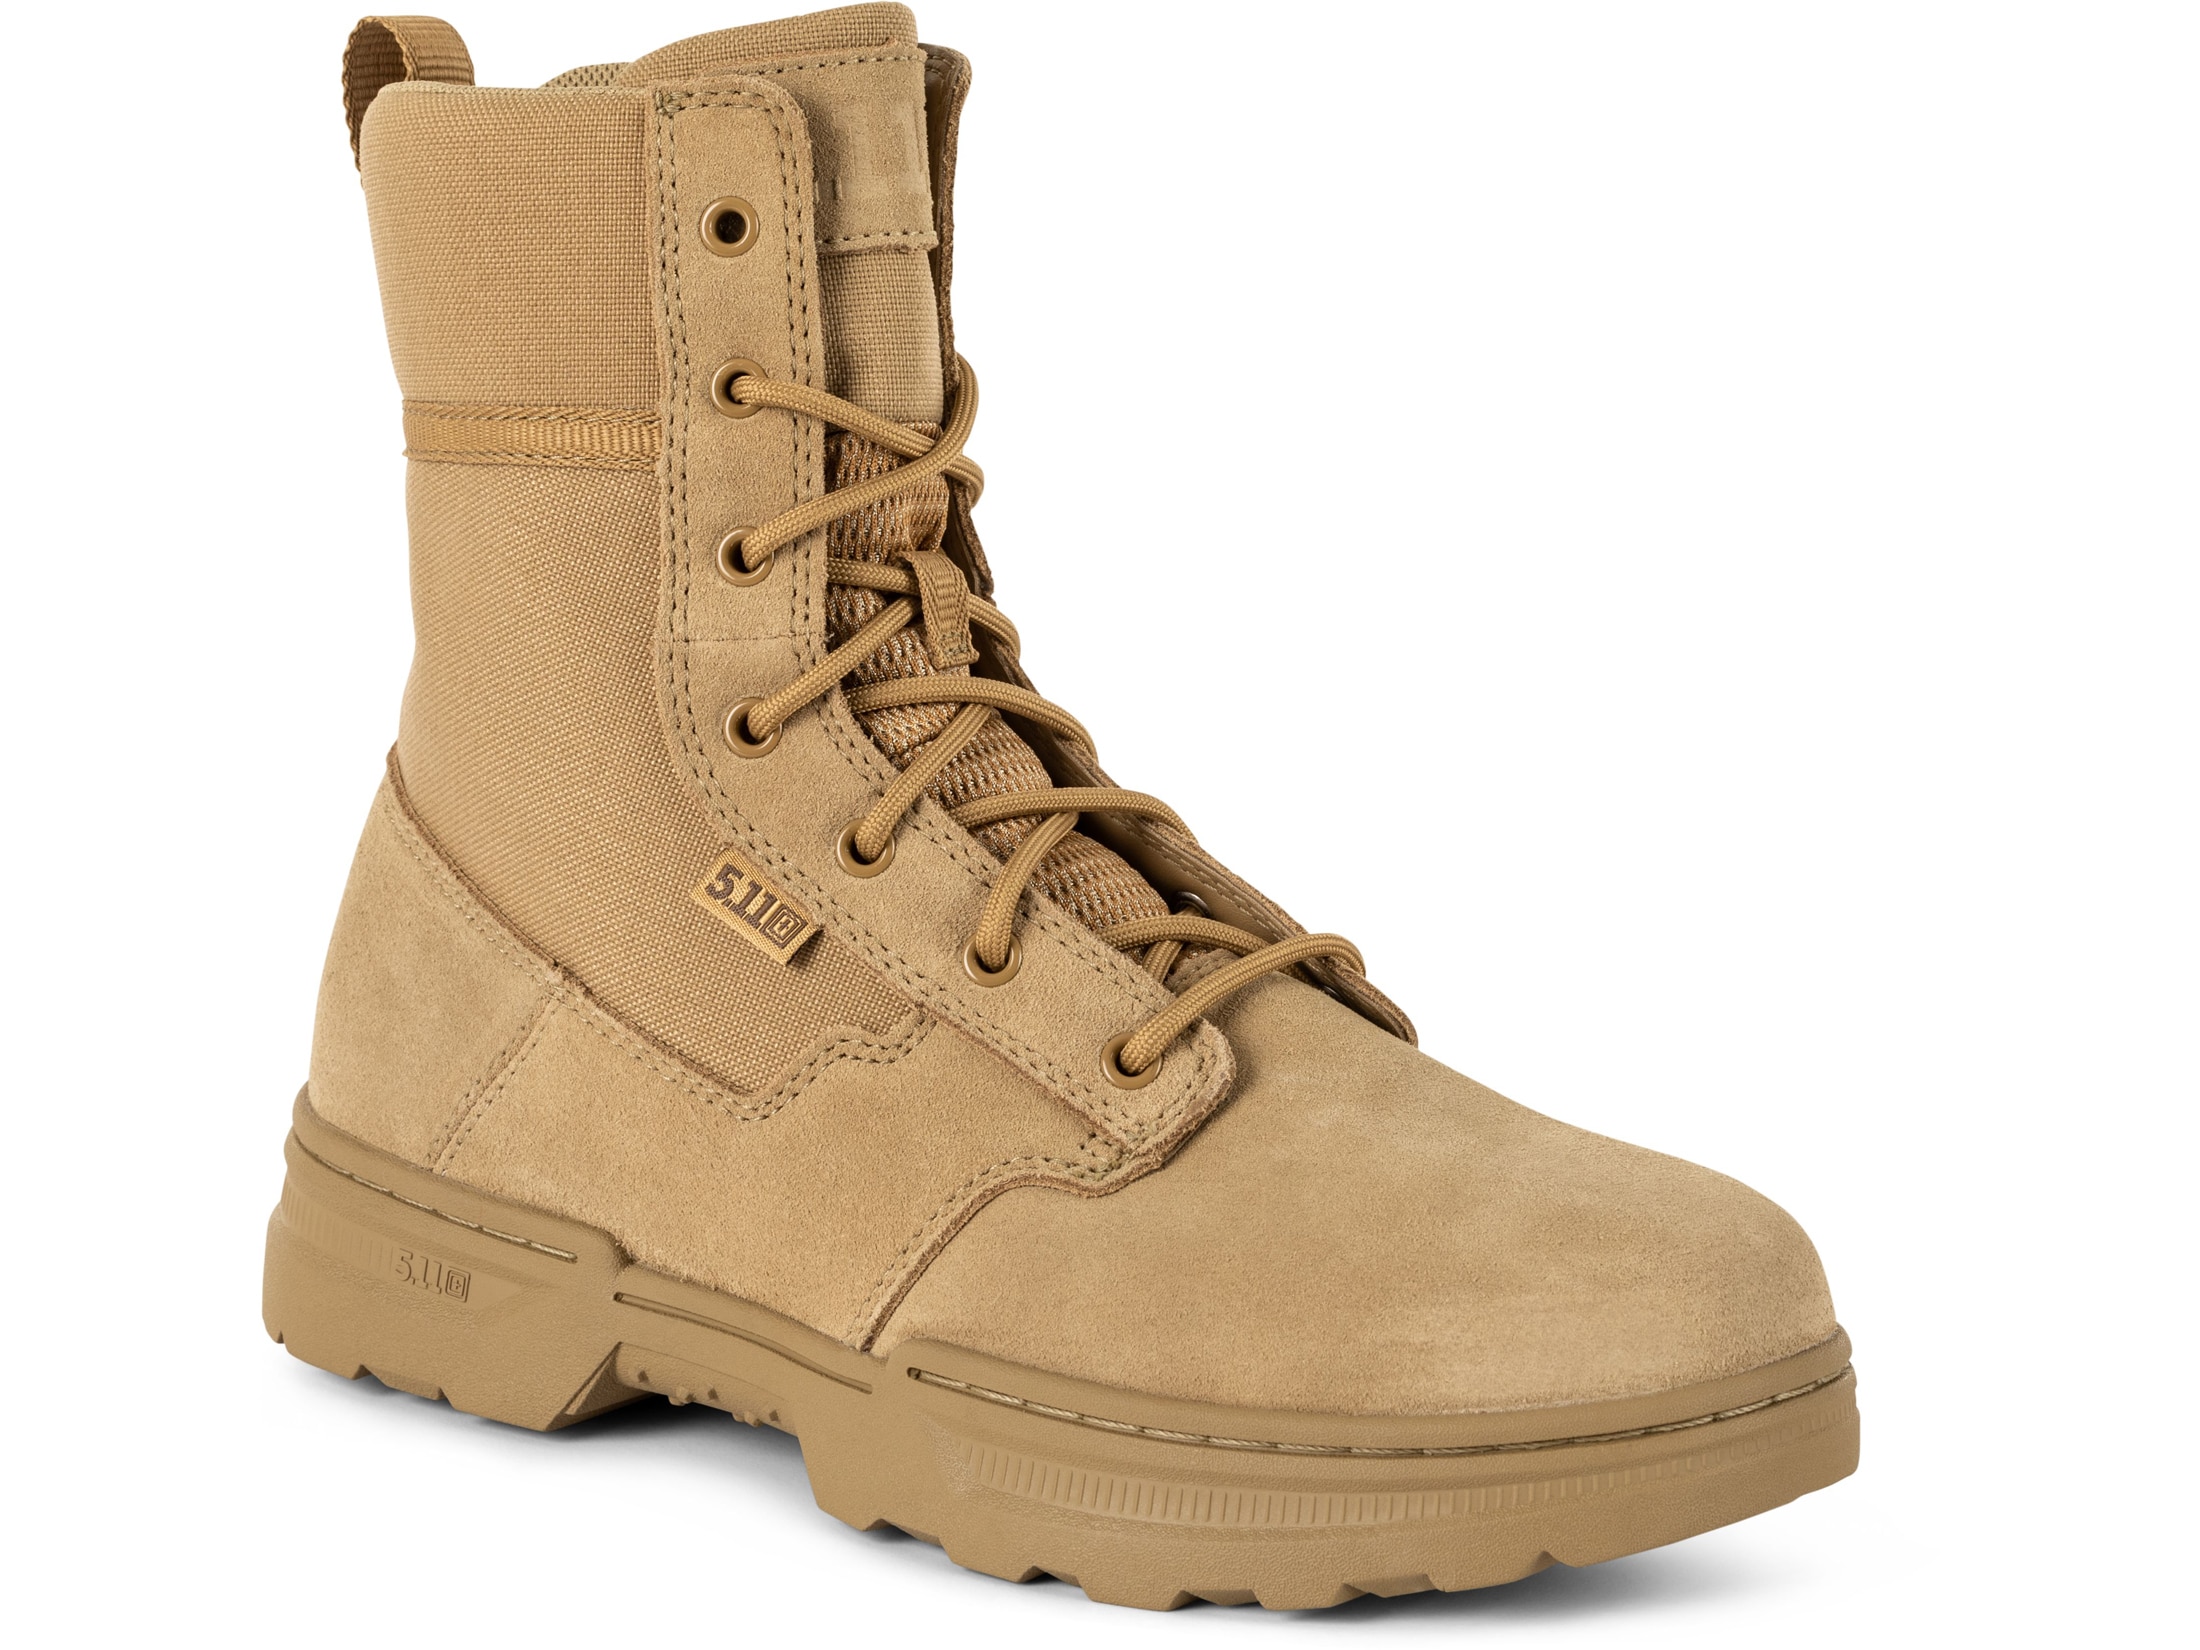 5.11 Speed 4.0 8 Arid Tactical Boots Leather Coyote Men's 9.5 EE